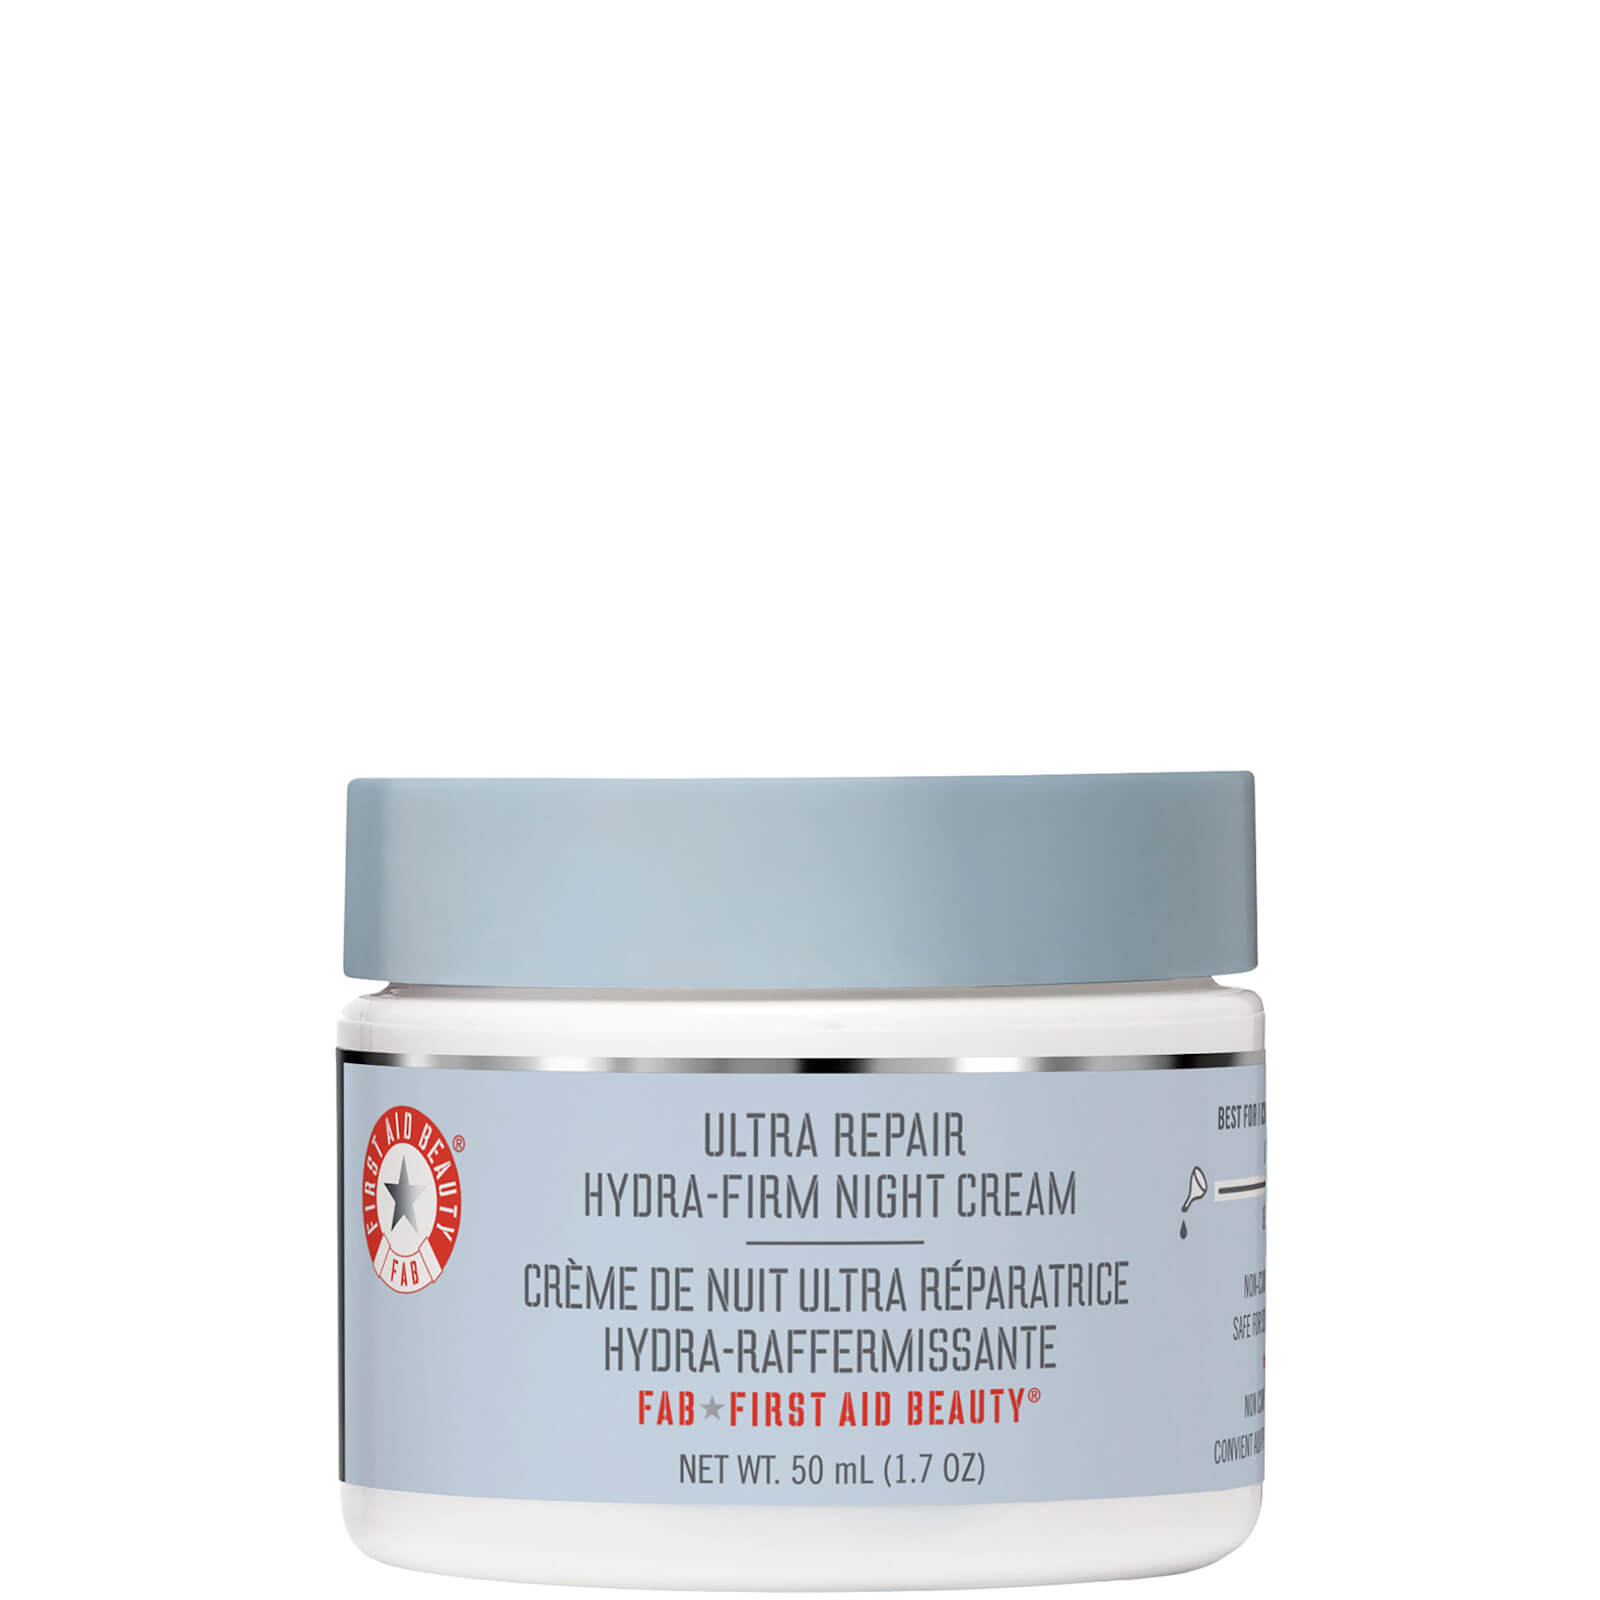 Image of First Aid Beauty Ultra Repair Hydra-Firm Night Cream 48g